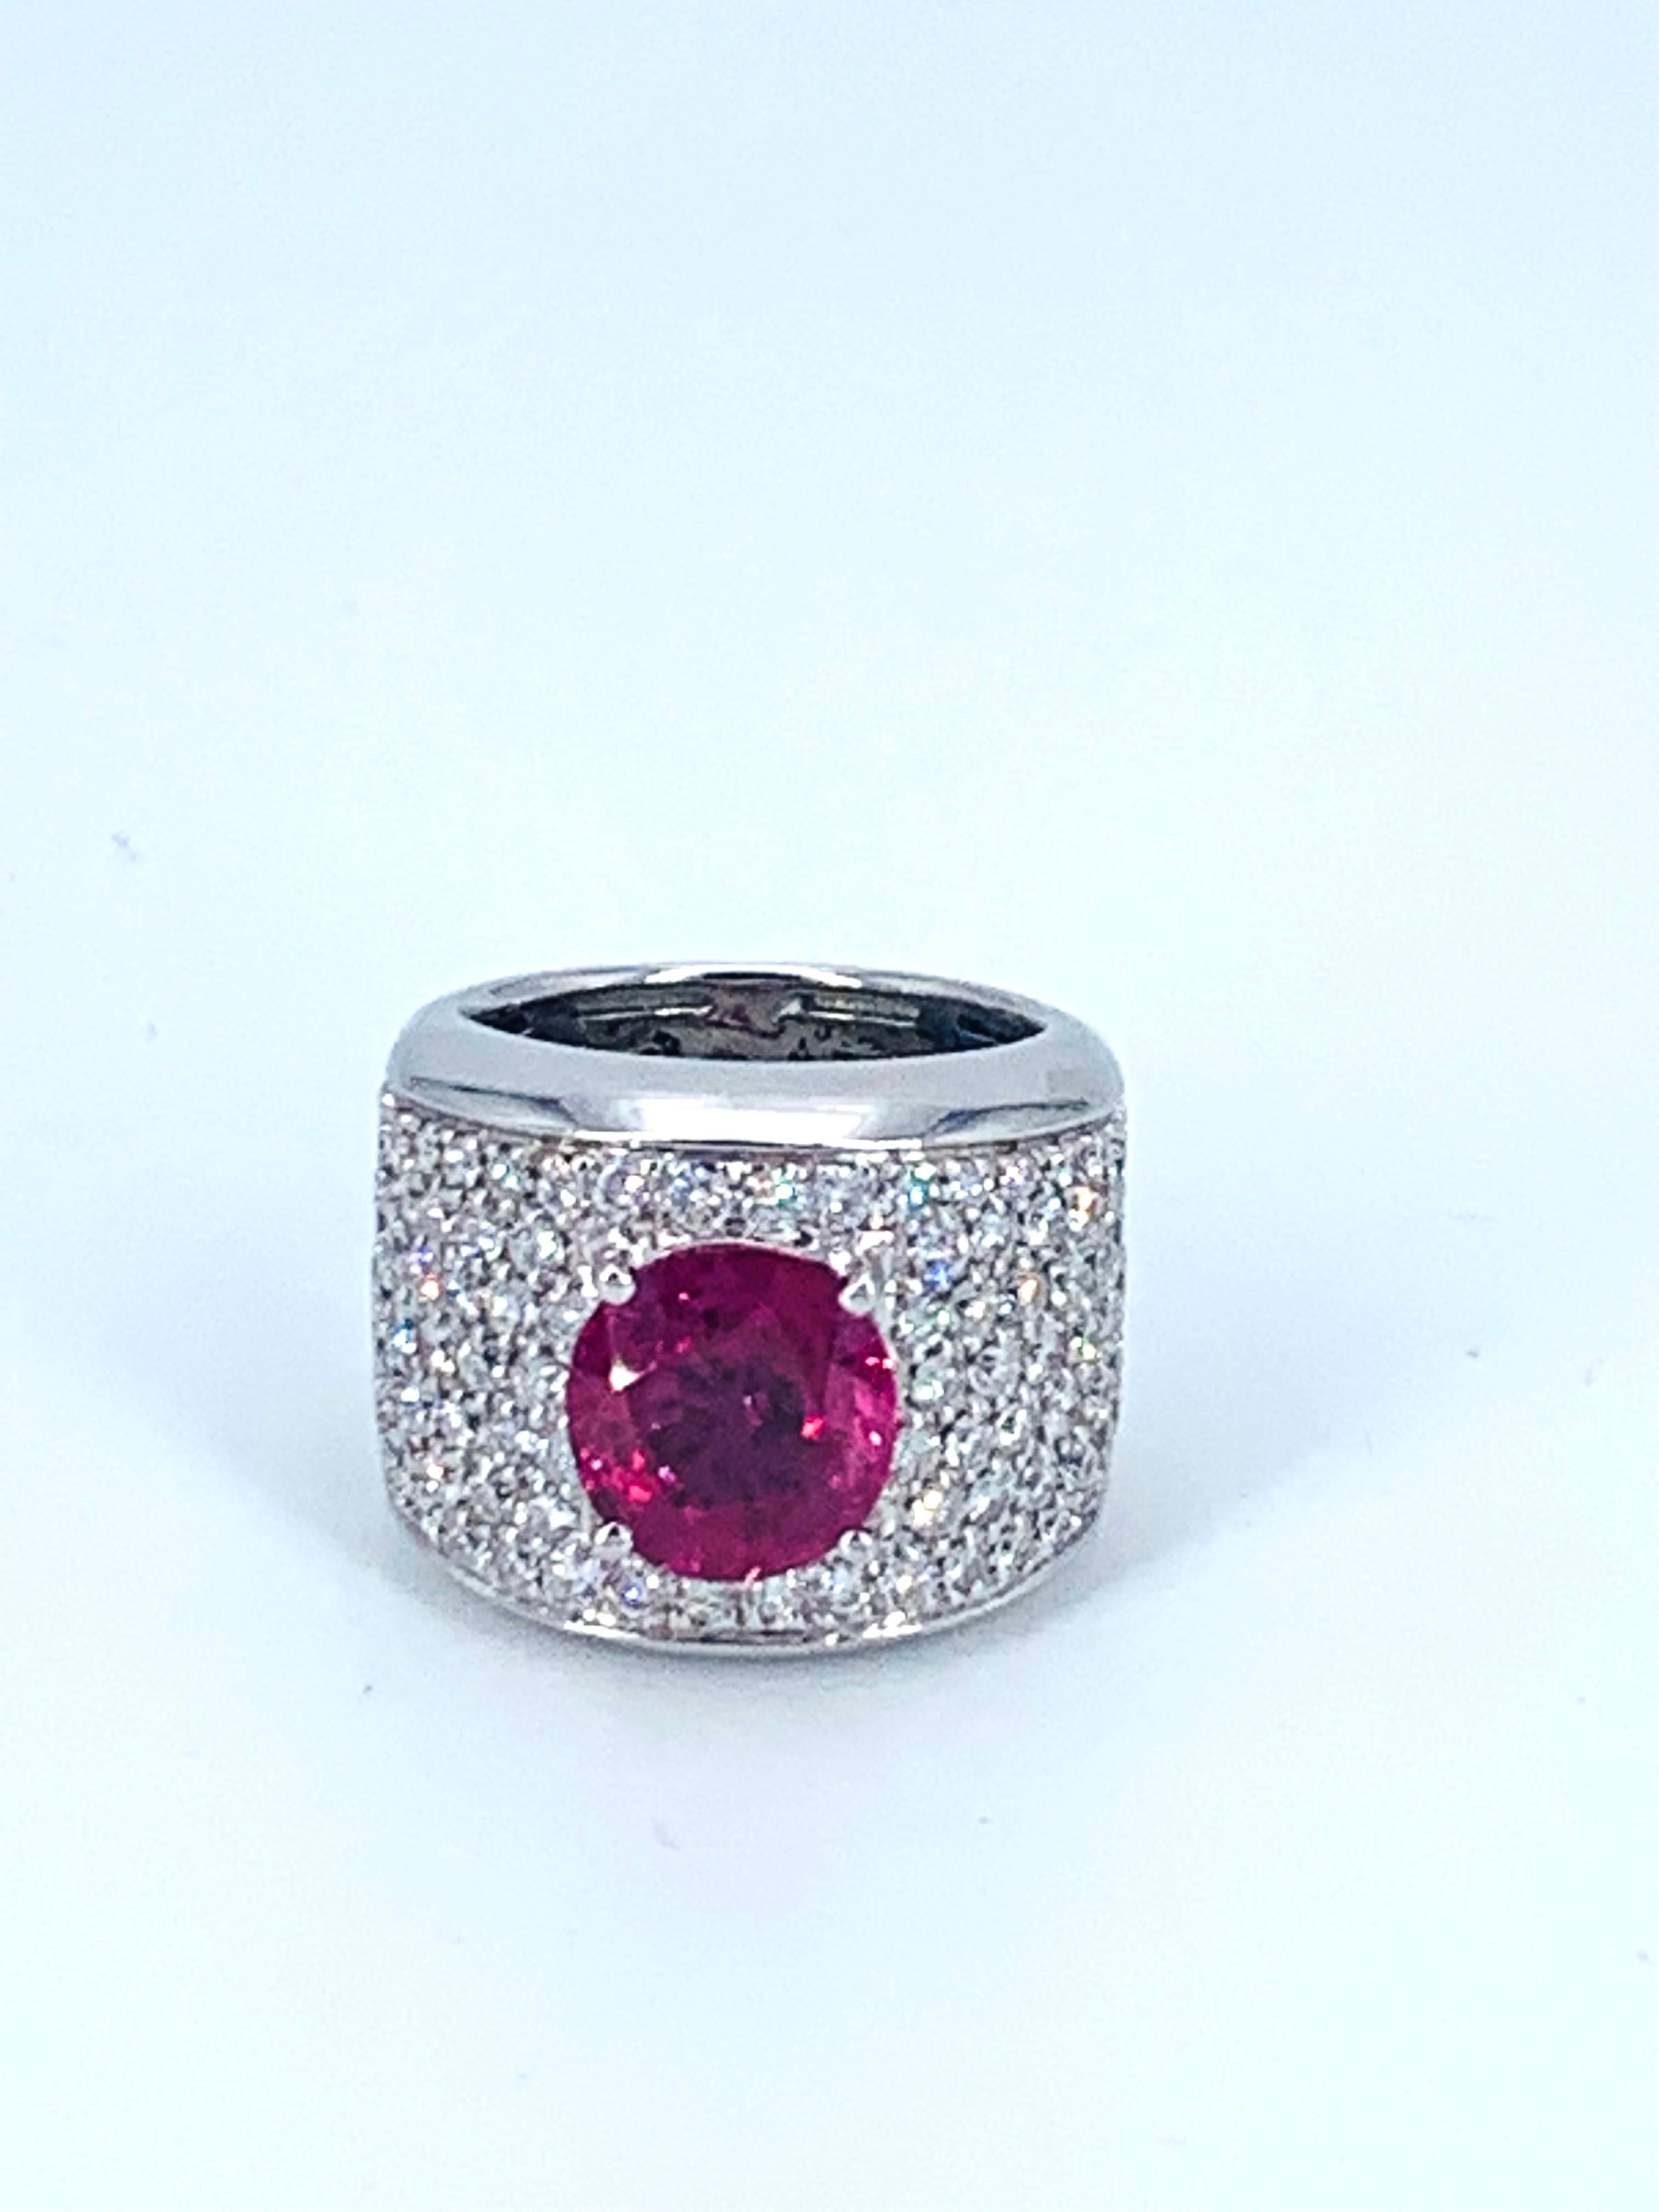 This 4.67 Carat Burma Ruby and 3.25 Carat Diamond band ring makes a seriously impressive statement on the hand. 
The ring is set in 18Kt white Gold with the Ruby in the heart of the face surrounded by wonderfully bright natural white Diamonds half